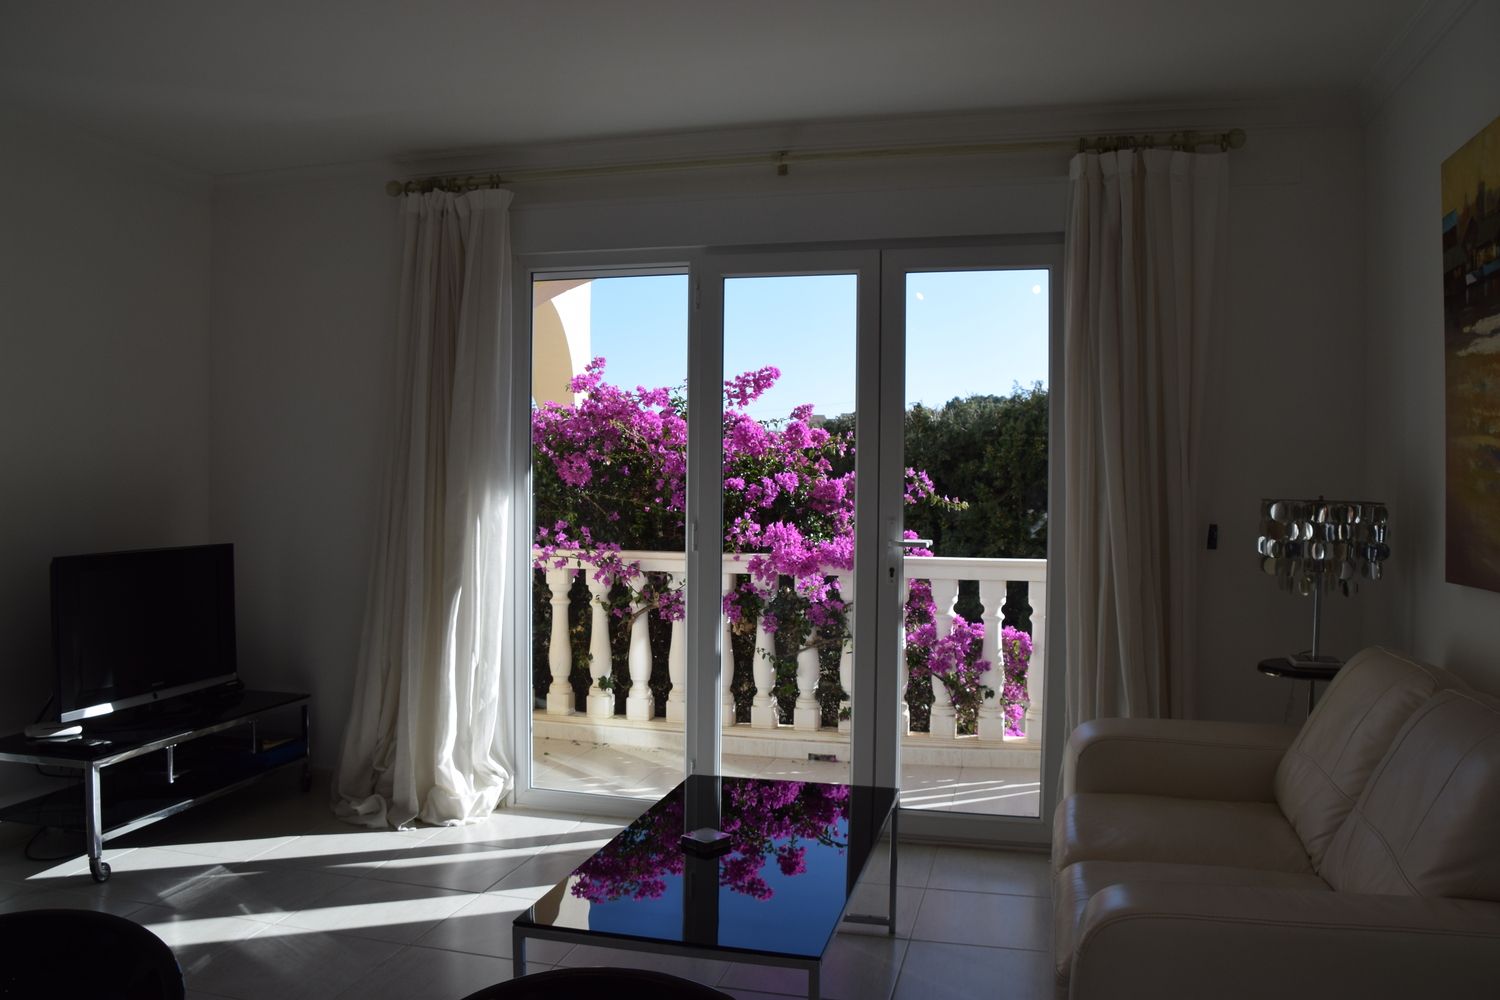 Benissa La Fustera: Beautiful apartment with a view of the pool